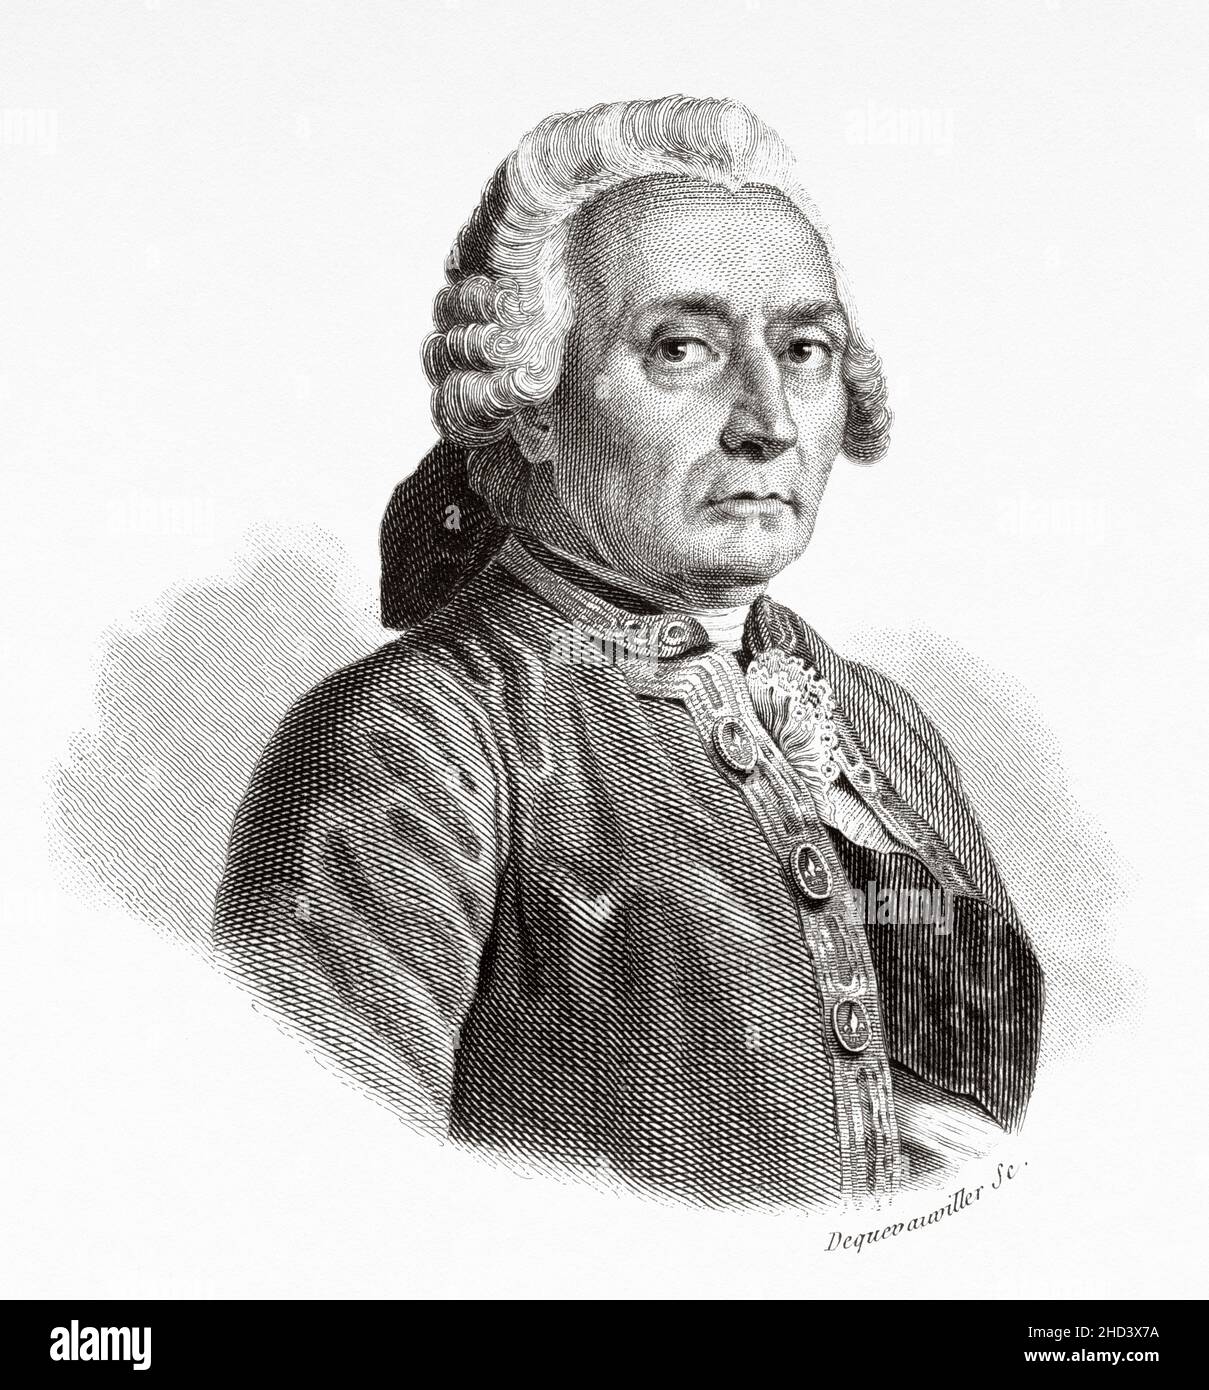 Jean-Rodolphe Perronet (1708-1794) was a French engineer and architect, known for his many bridge designs and for being the founder and first director of the École des ponts et chaussées in Paris. France. Europe. Old 19th century engraved illustration from Portraits et histoire des hommes utile by Societe Montyon et Franklin 1837 Stock Photo